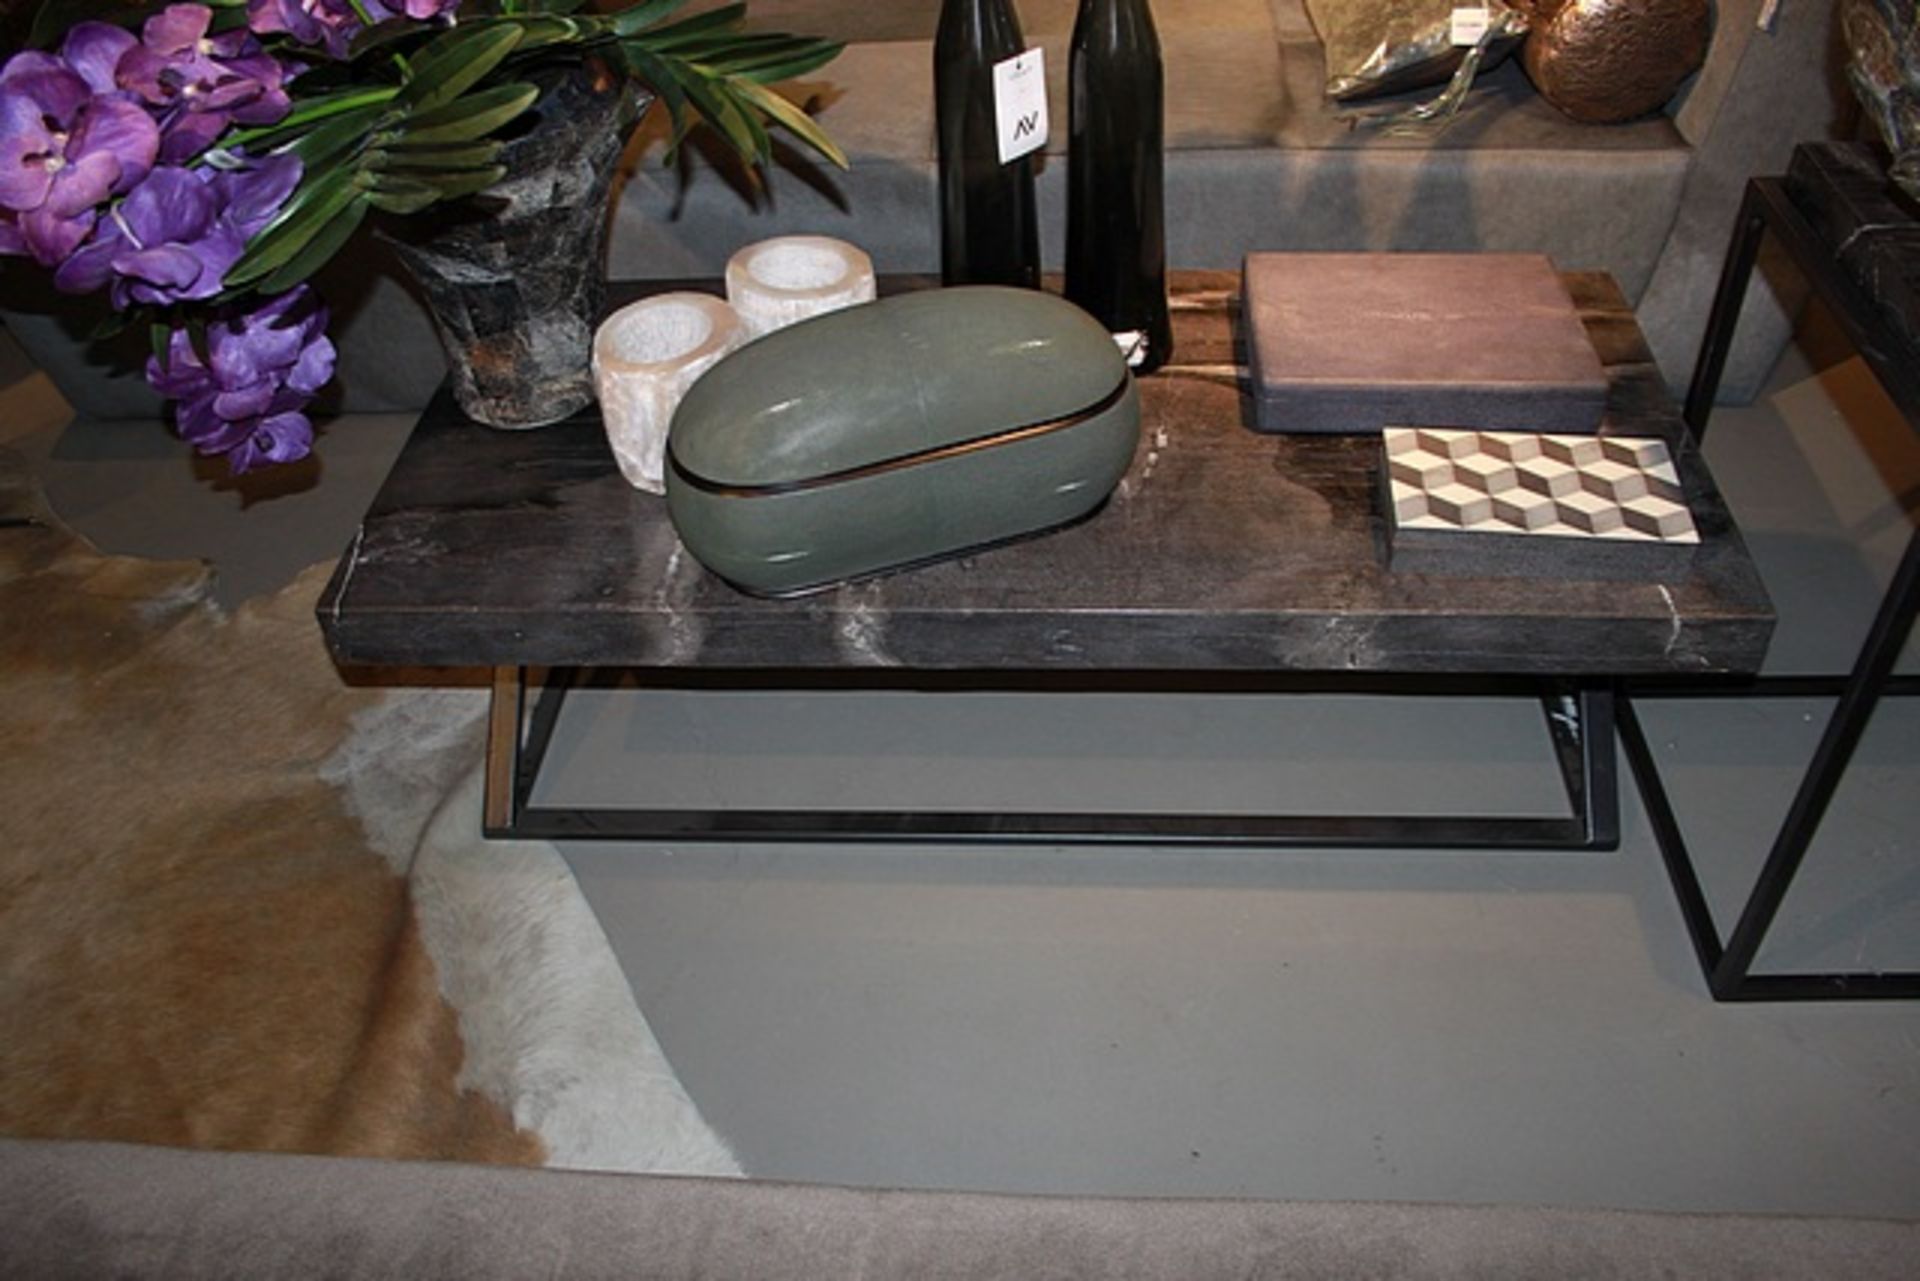 Coffee Table Solor black solid top in assorted petrified wood - petrified wood is the name given